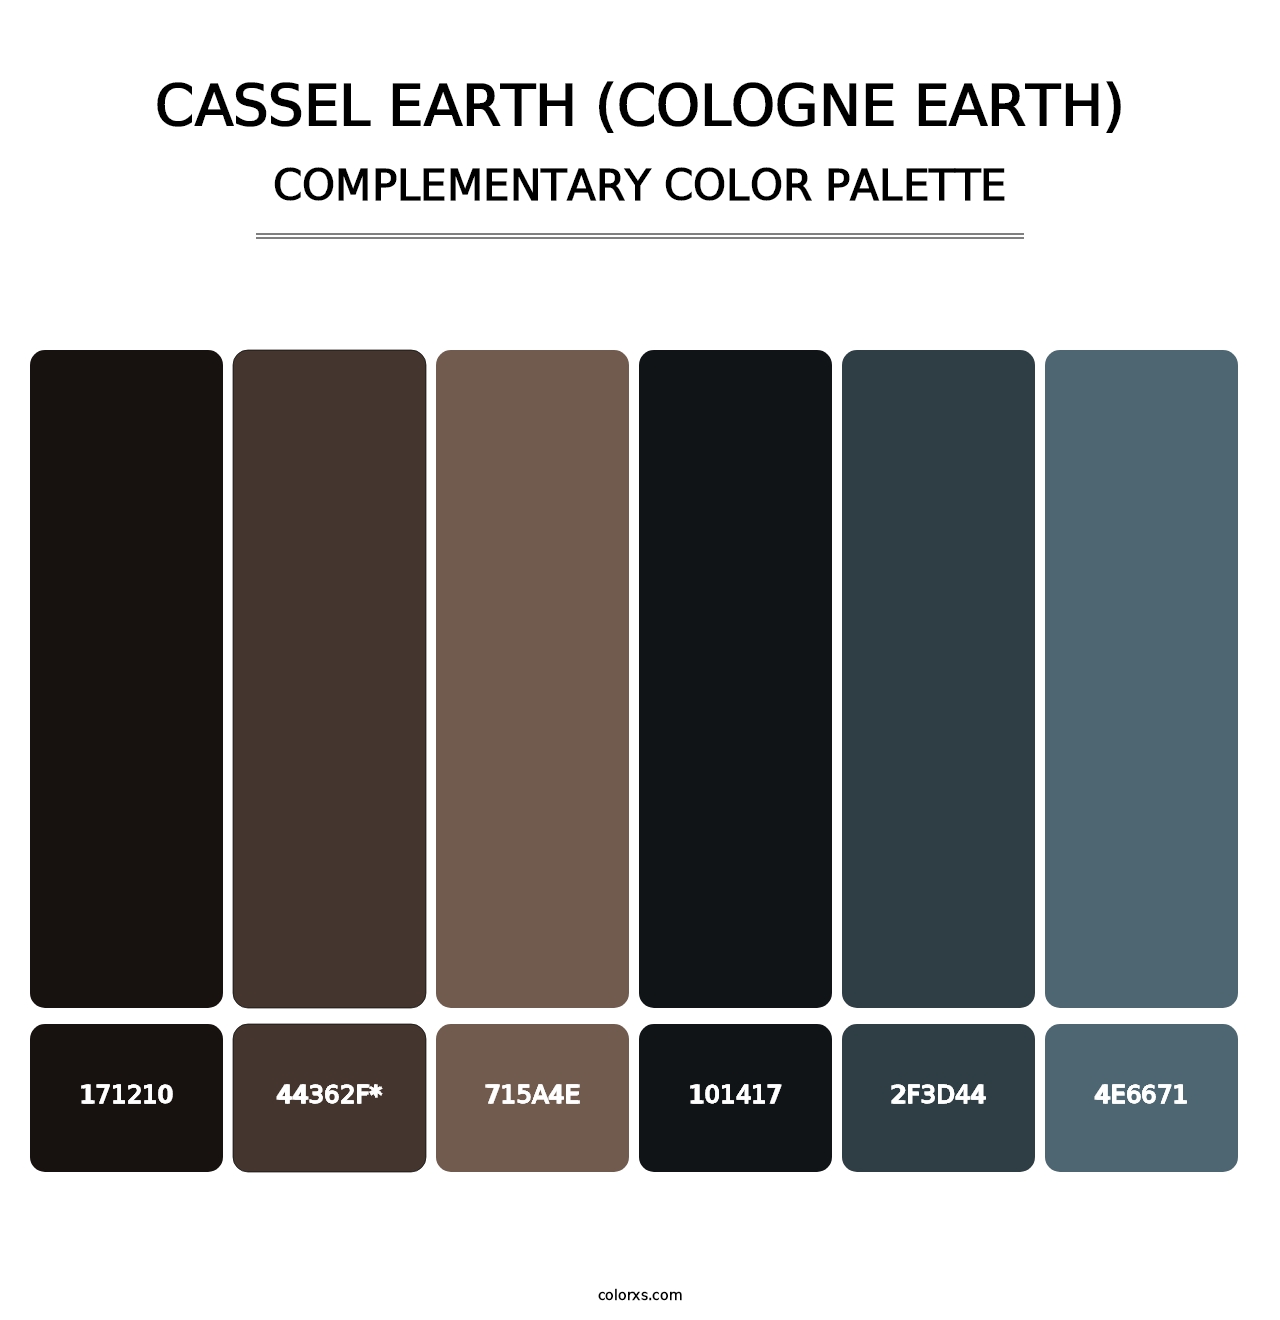 Cassel Earth (Cologne Earth) - Complementary Color Palette